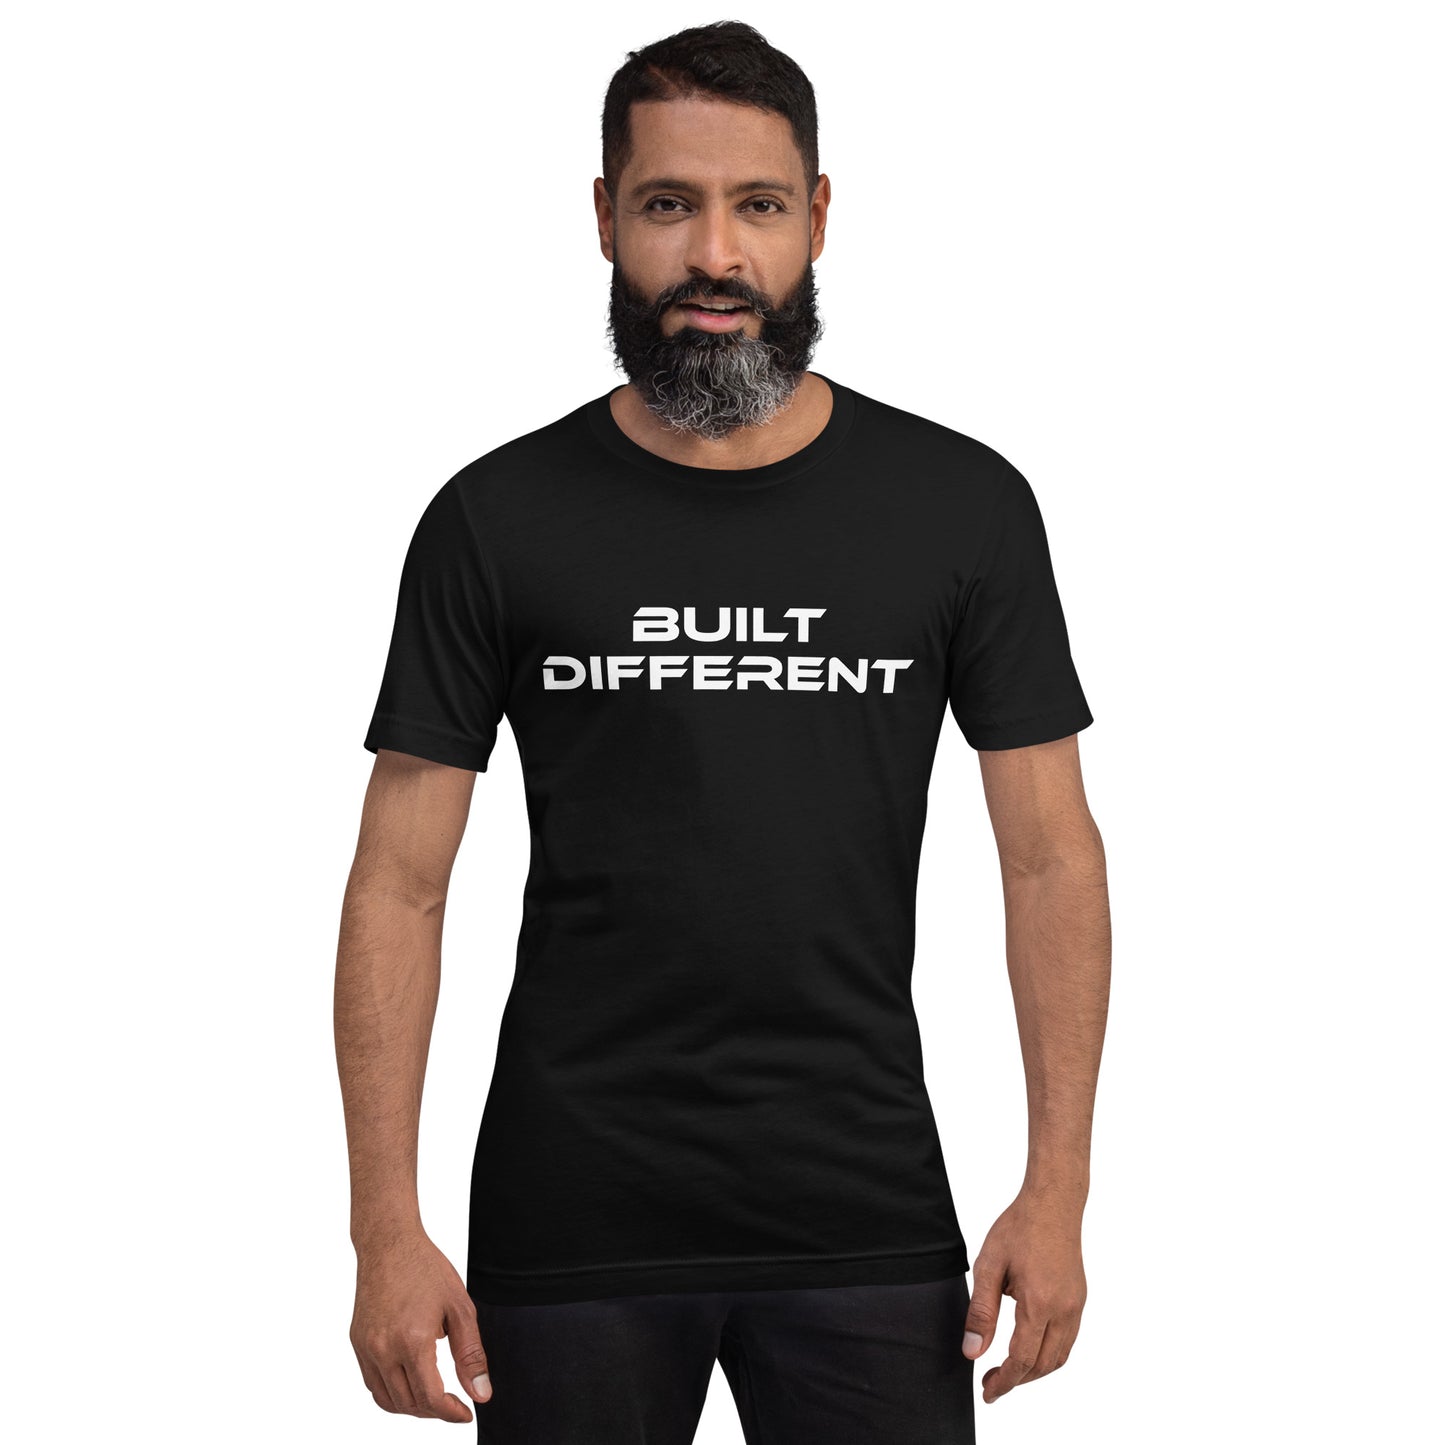 Built different Men's t-shirt-Soft and Trendy Everyday Tee